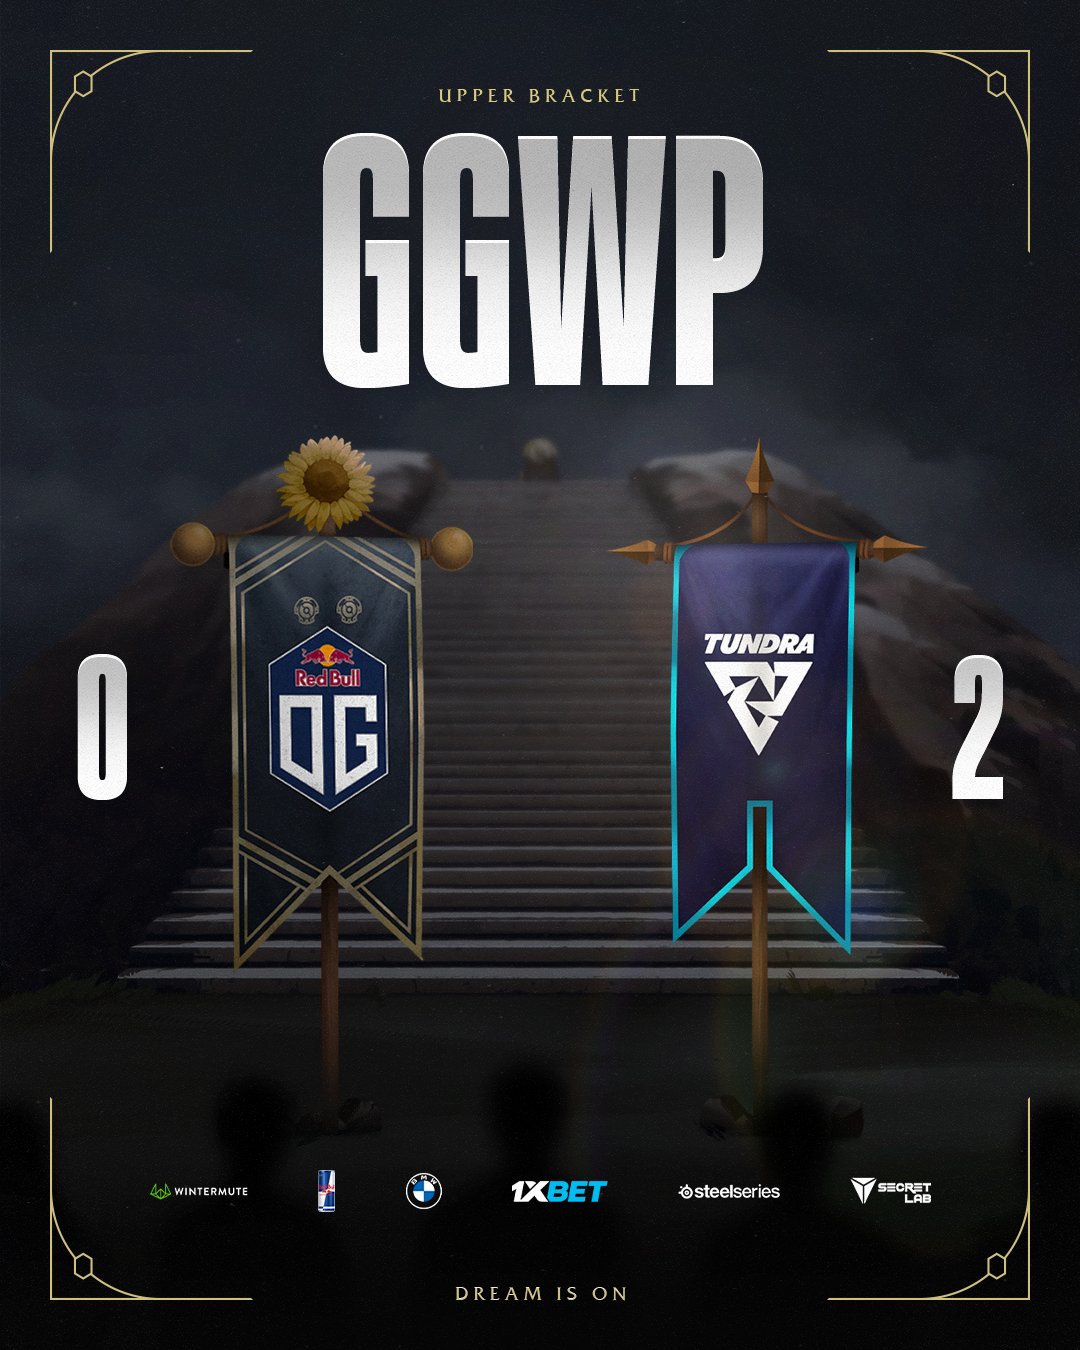 OG on X: I guess they got their revenge. GGWP @TundraEsports See